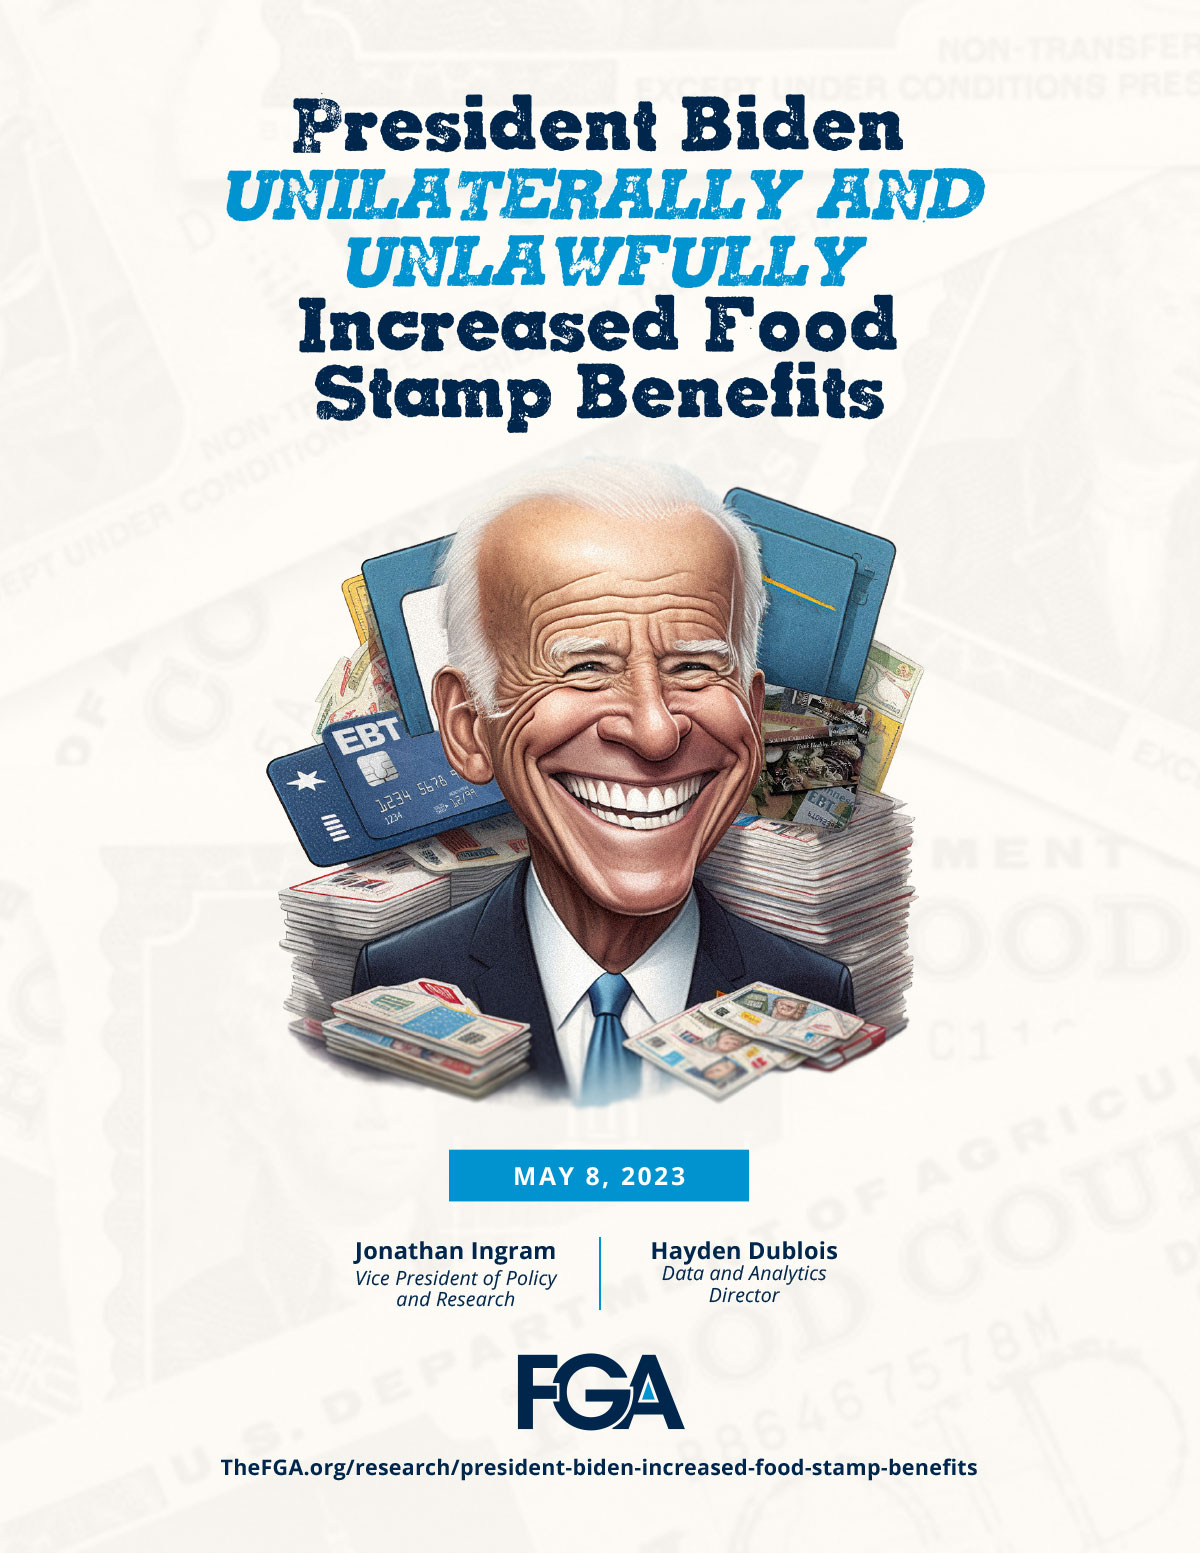 President Biden Unilaterally and Unlawfully Increased Food Stamp Benefits